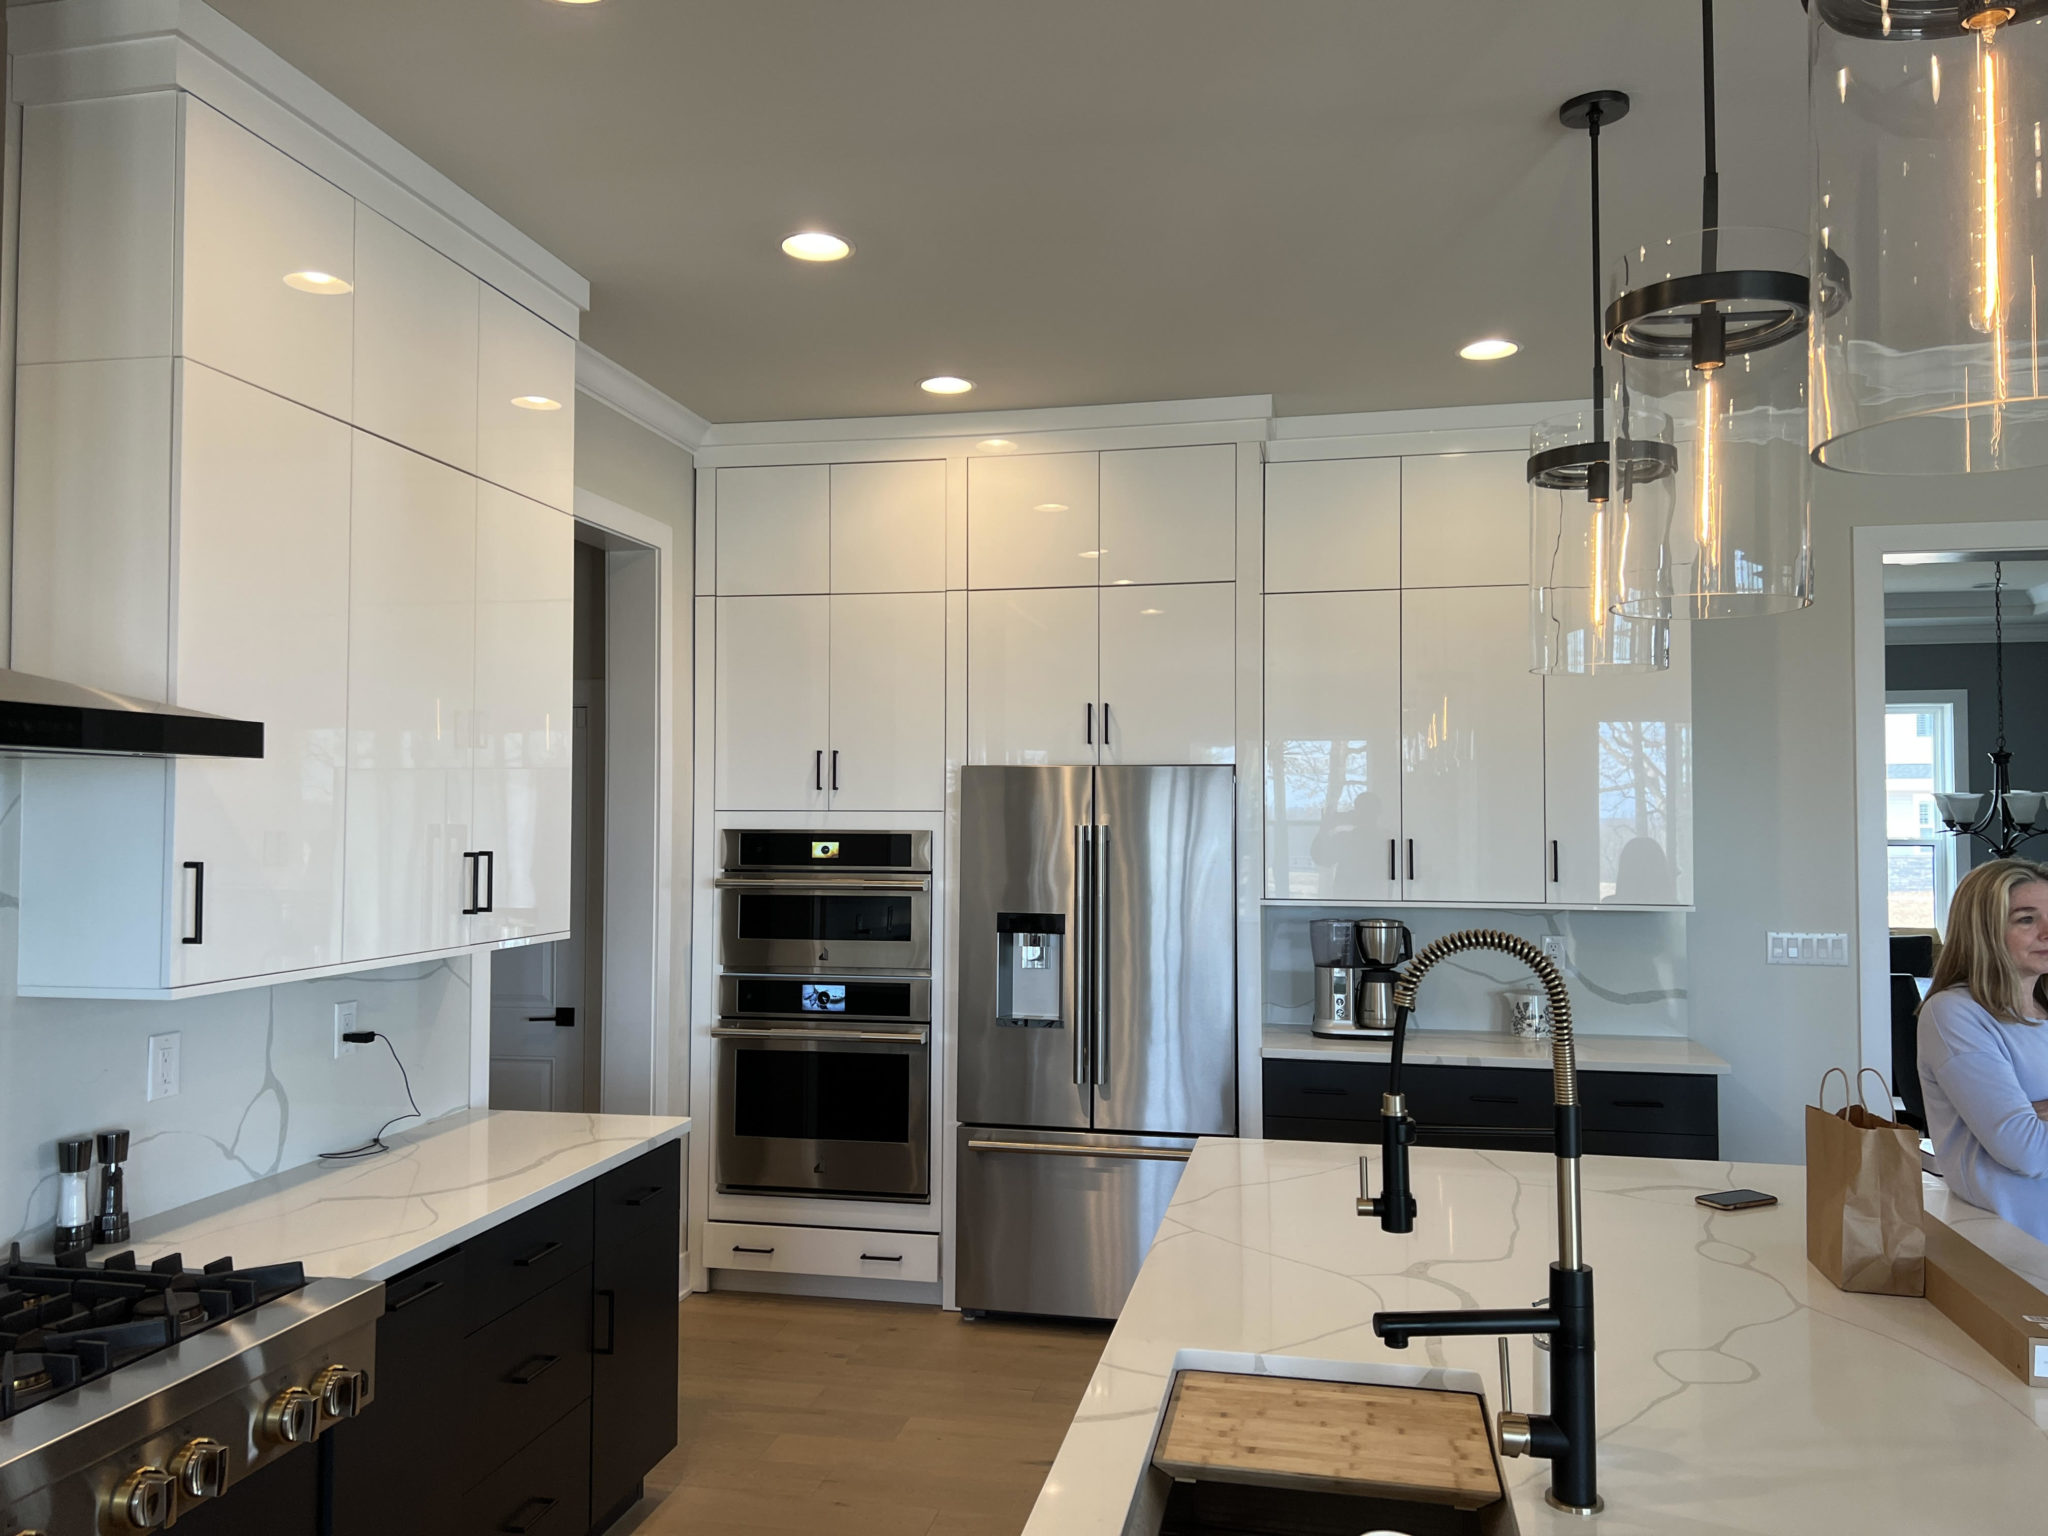 Kitchen Remodeling Services in West Chester, PA